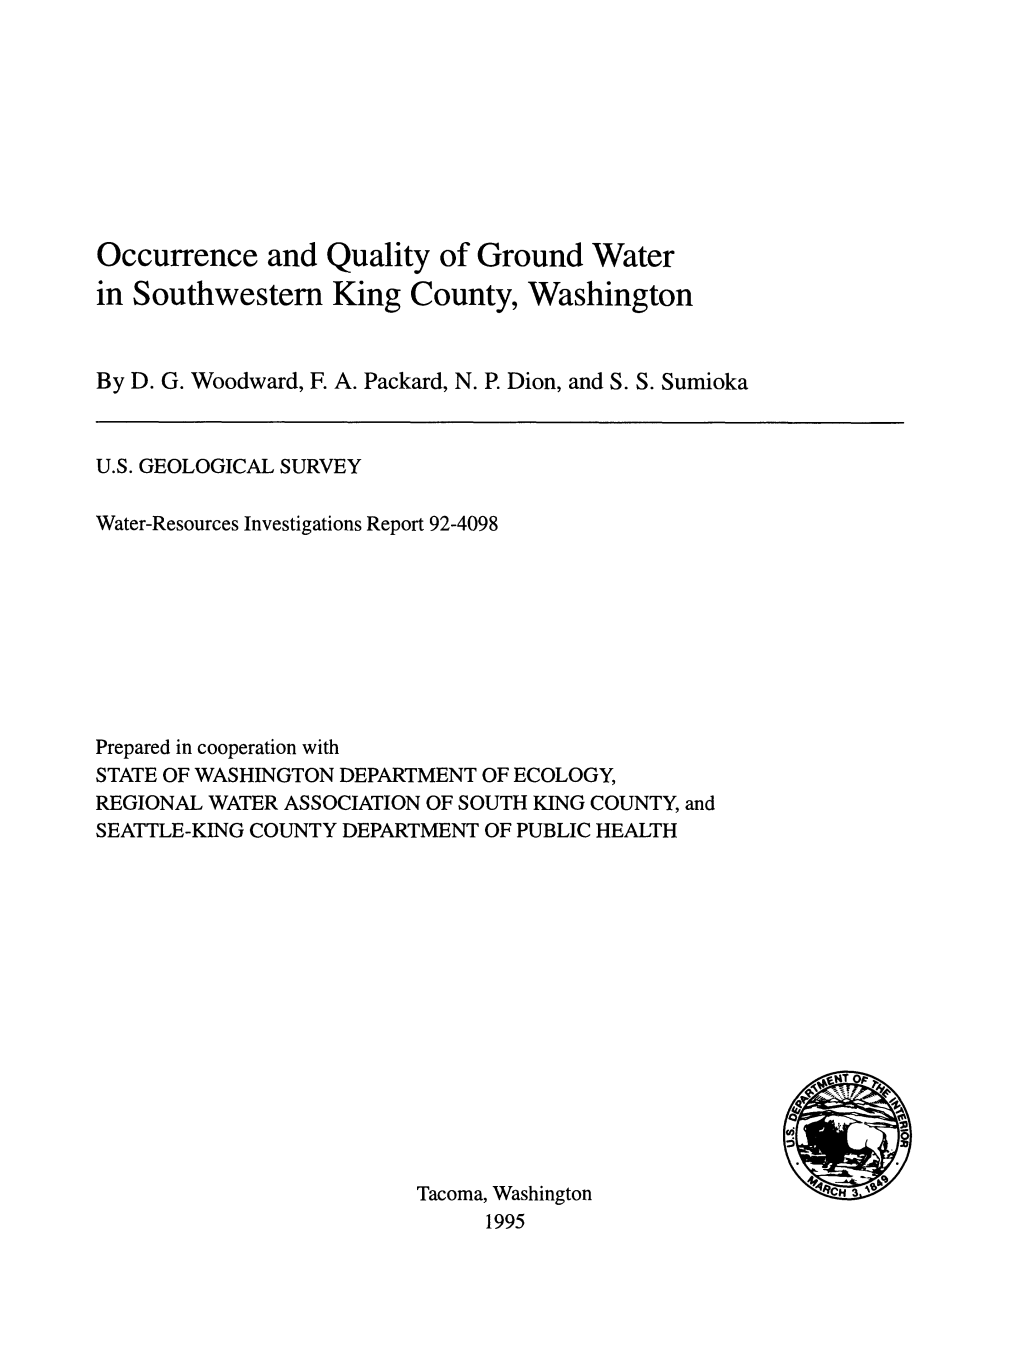 Occurrence and Quality of Ground Water in Southwestern King County, Washington